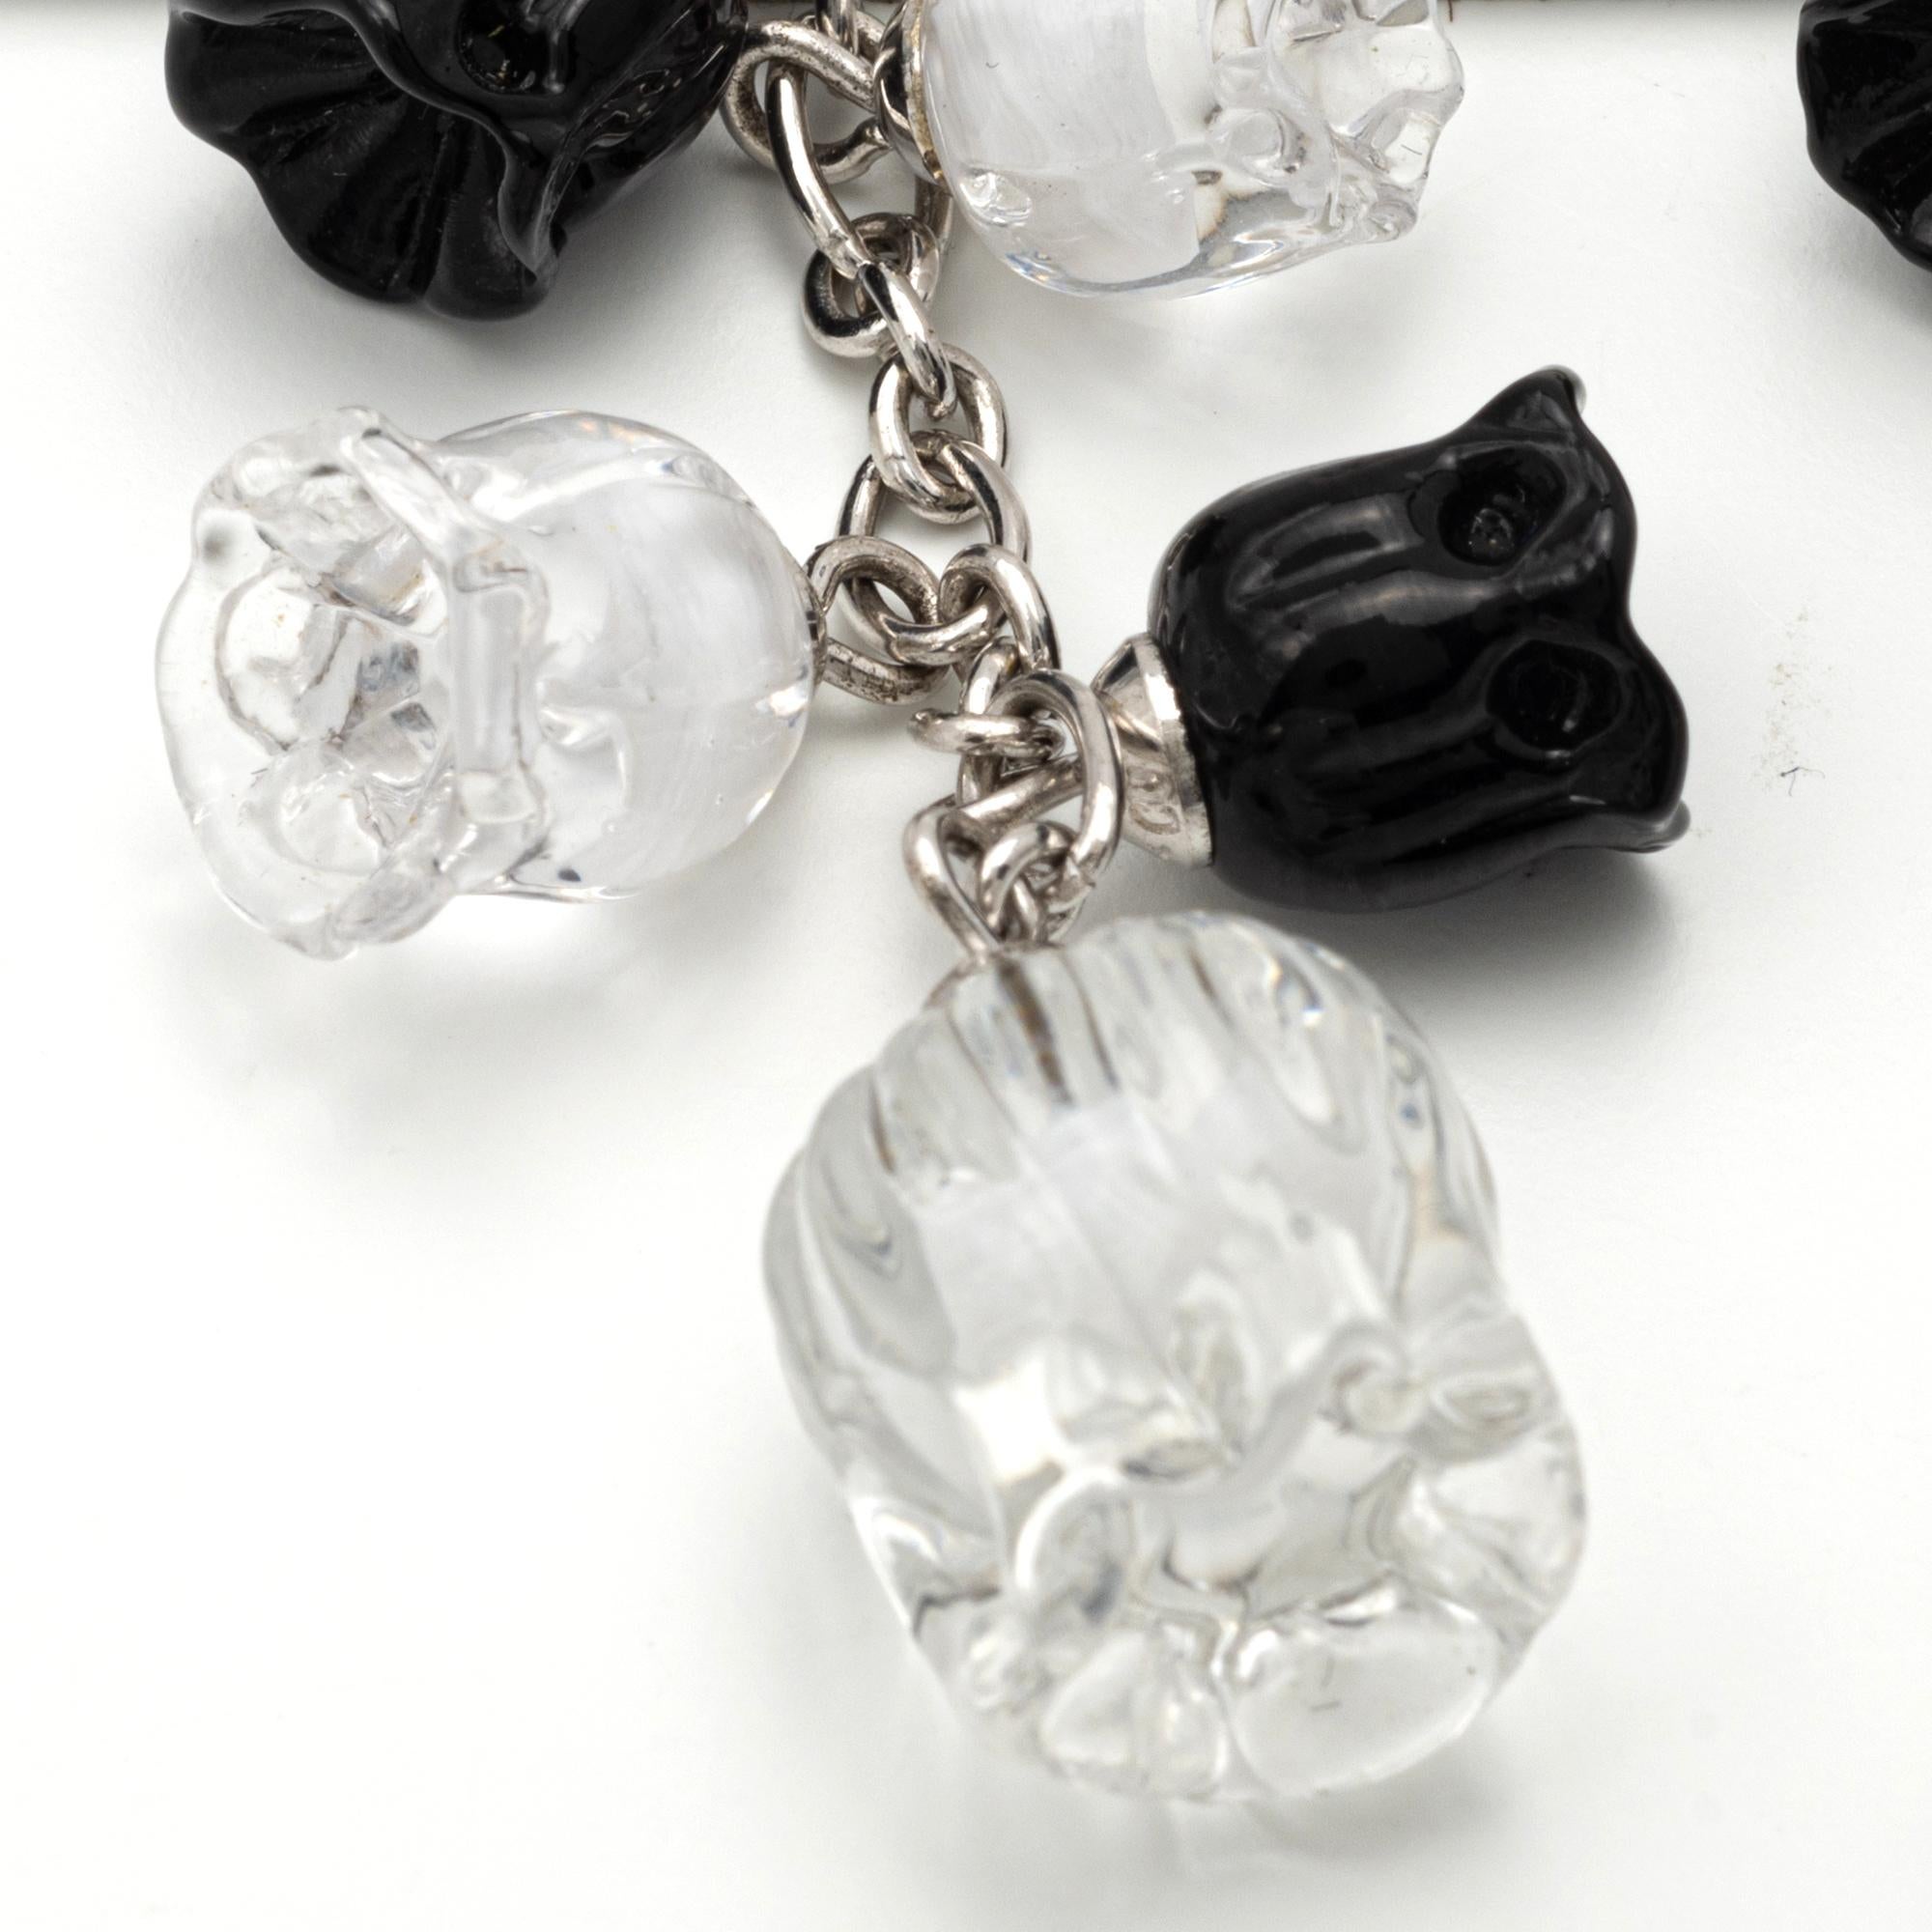 Vintage Lalique Black and White Crystal and Silver Earrings
Featuring black and white blooming crystal beads, 2 1/4 inches, signed Lalique.
